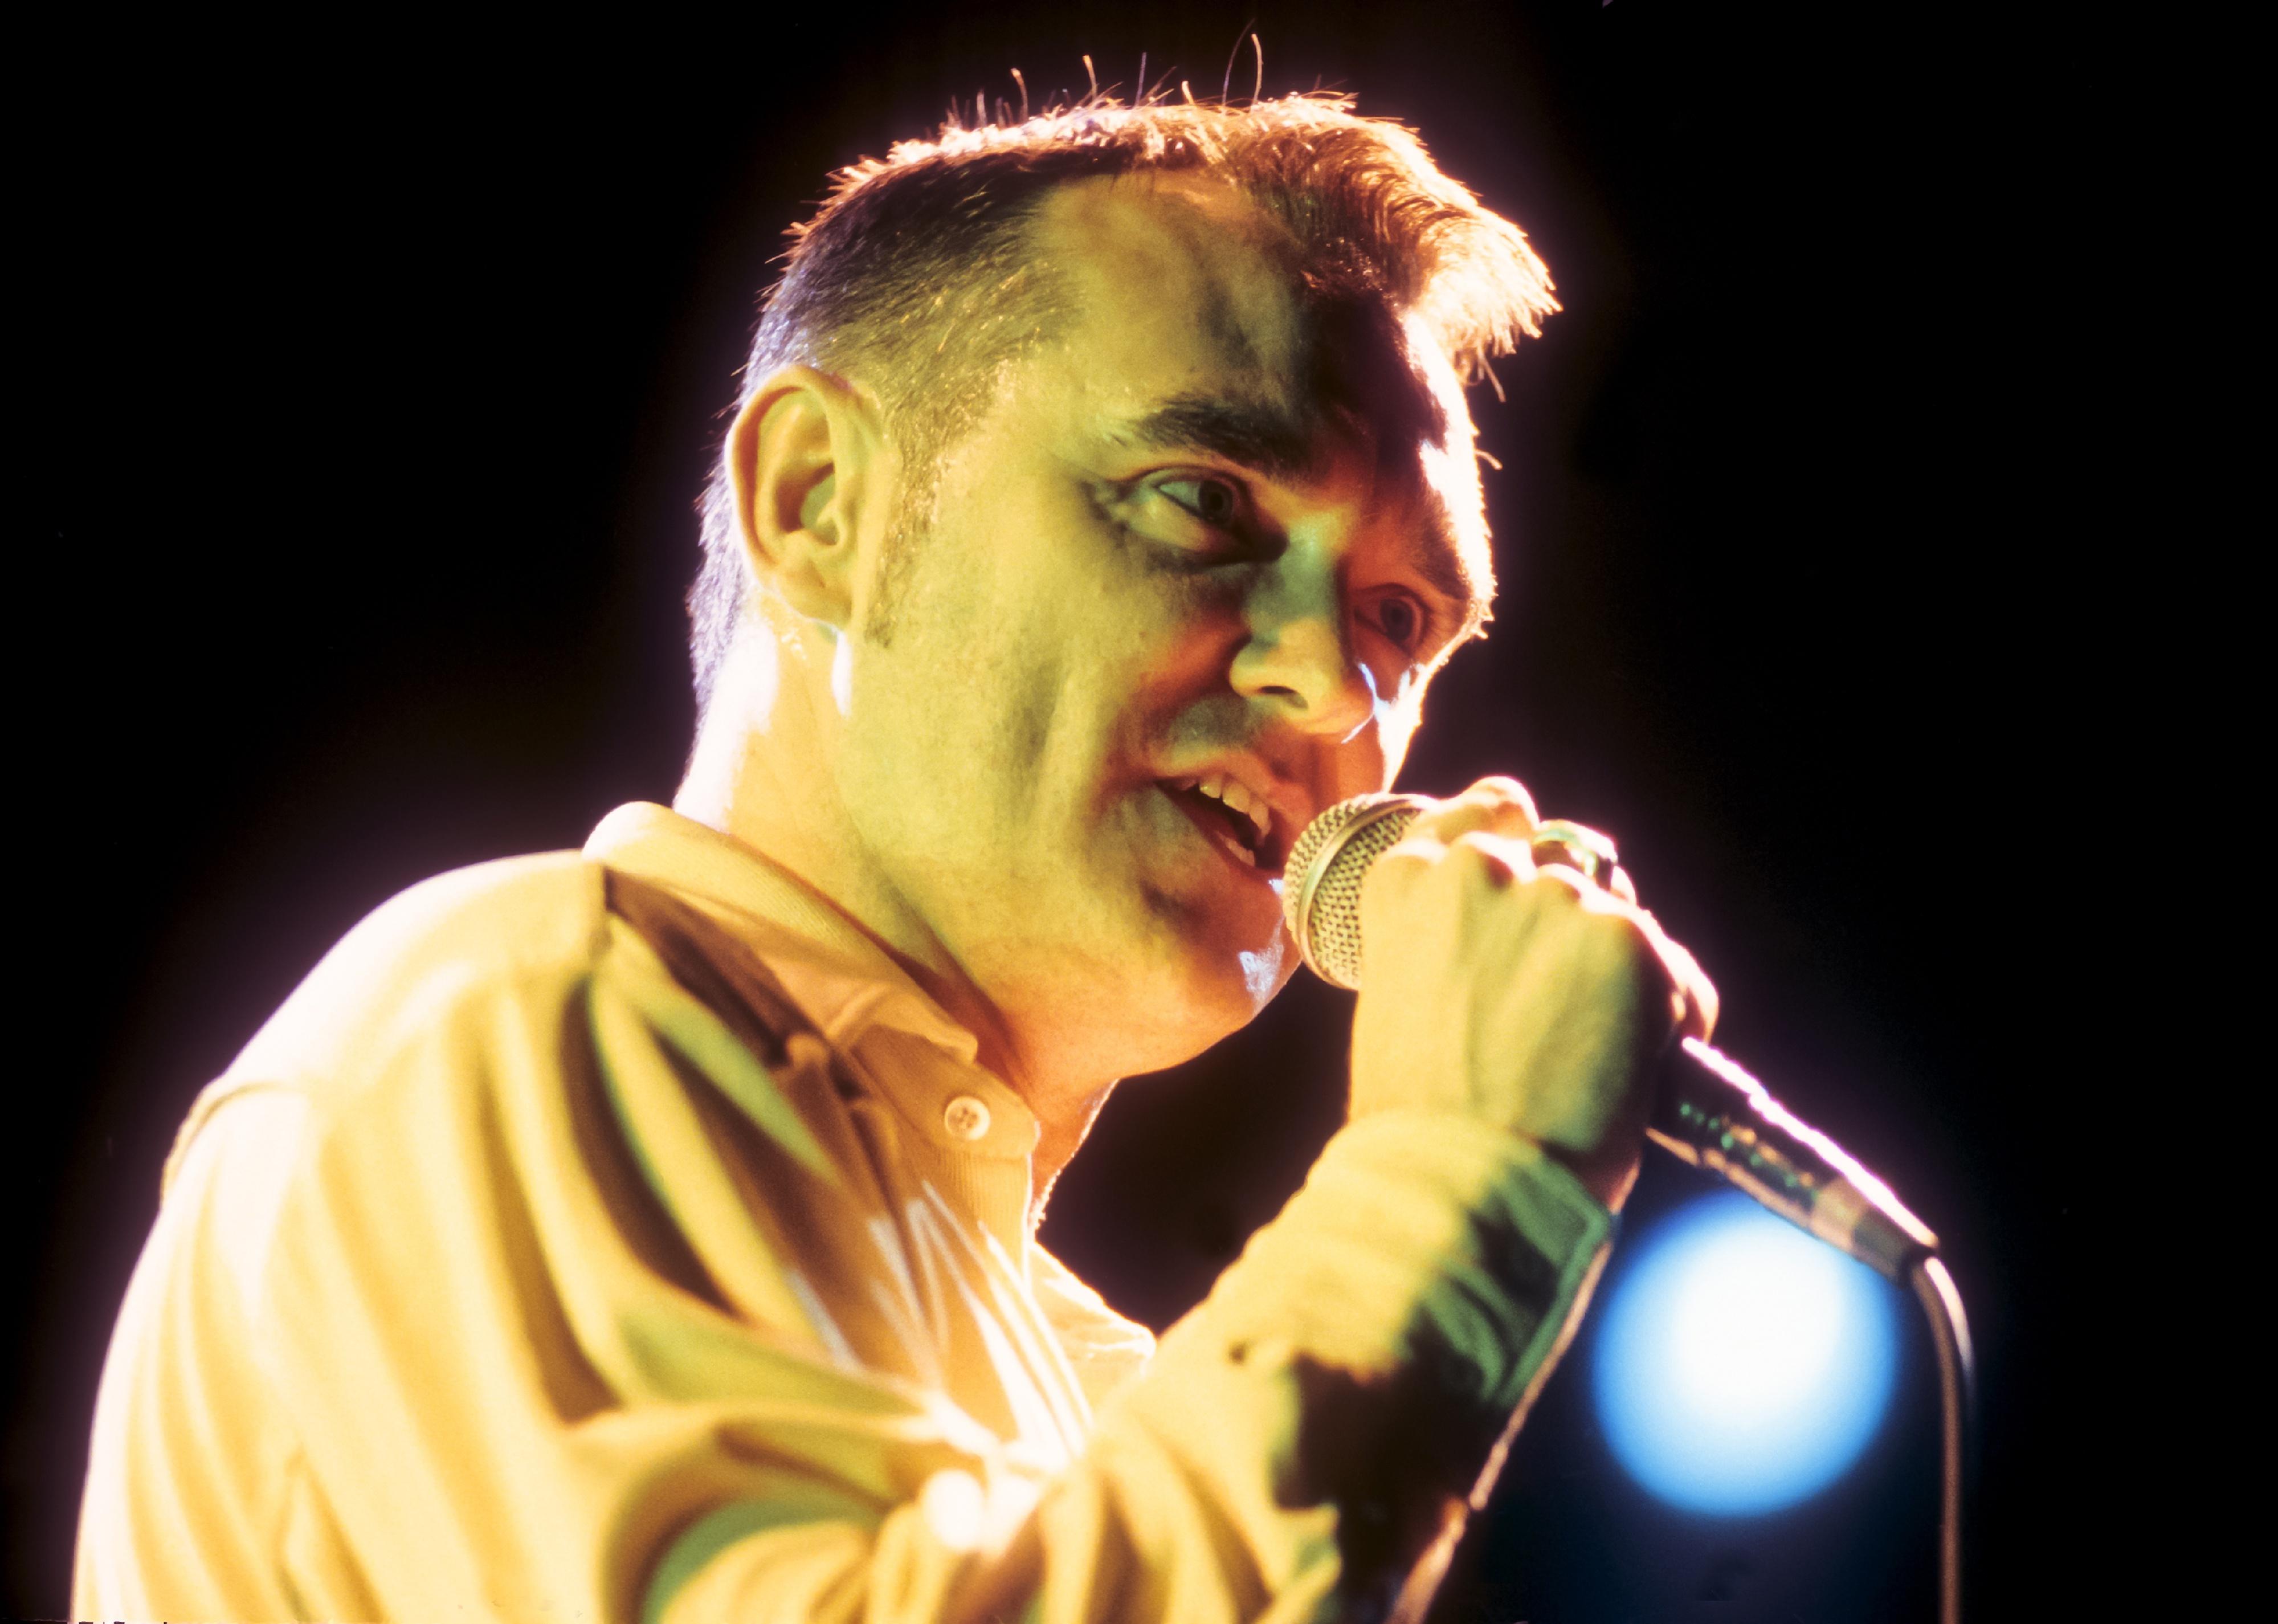 Morrissey performing under a yellow light.